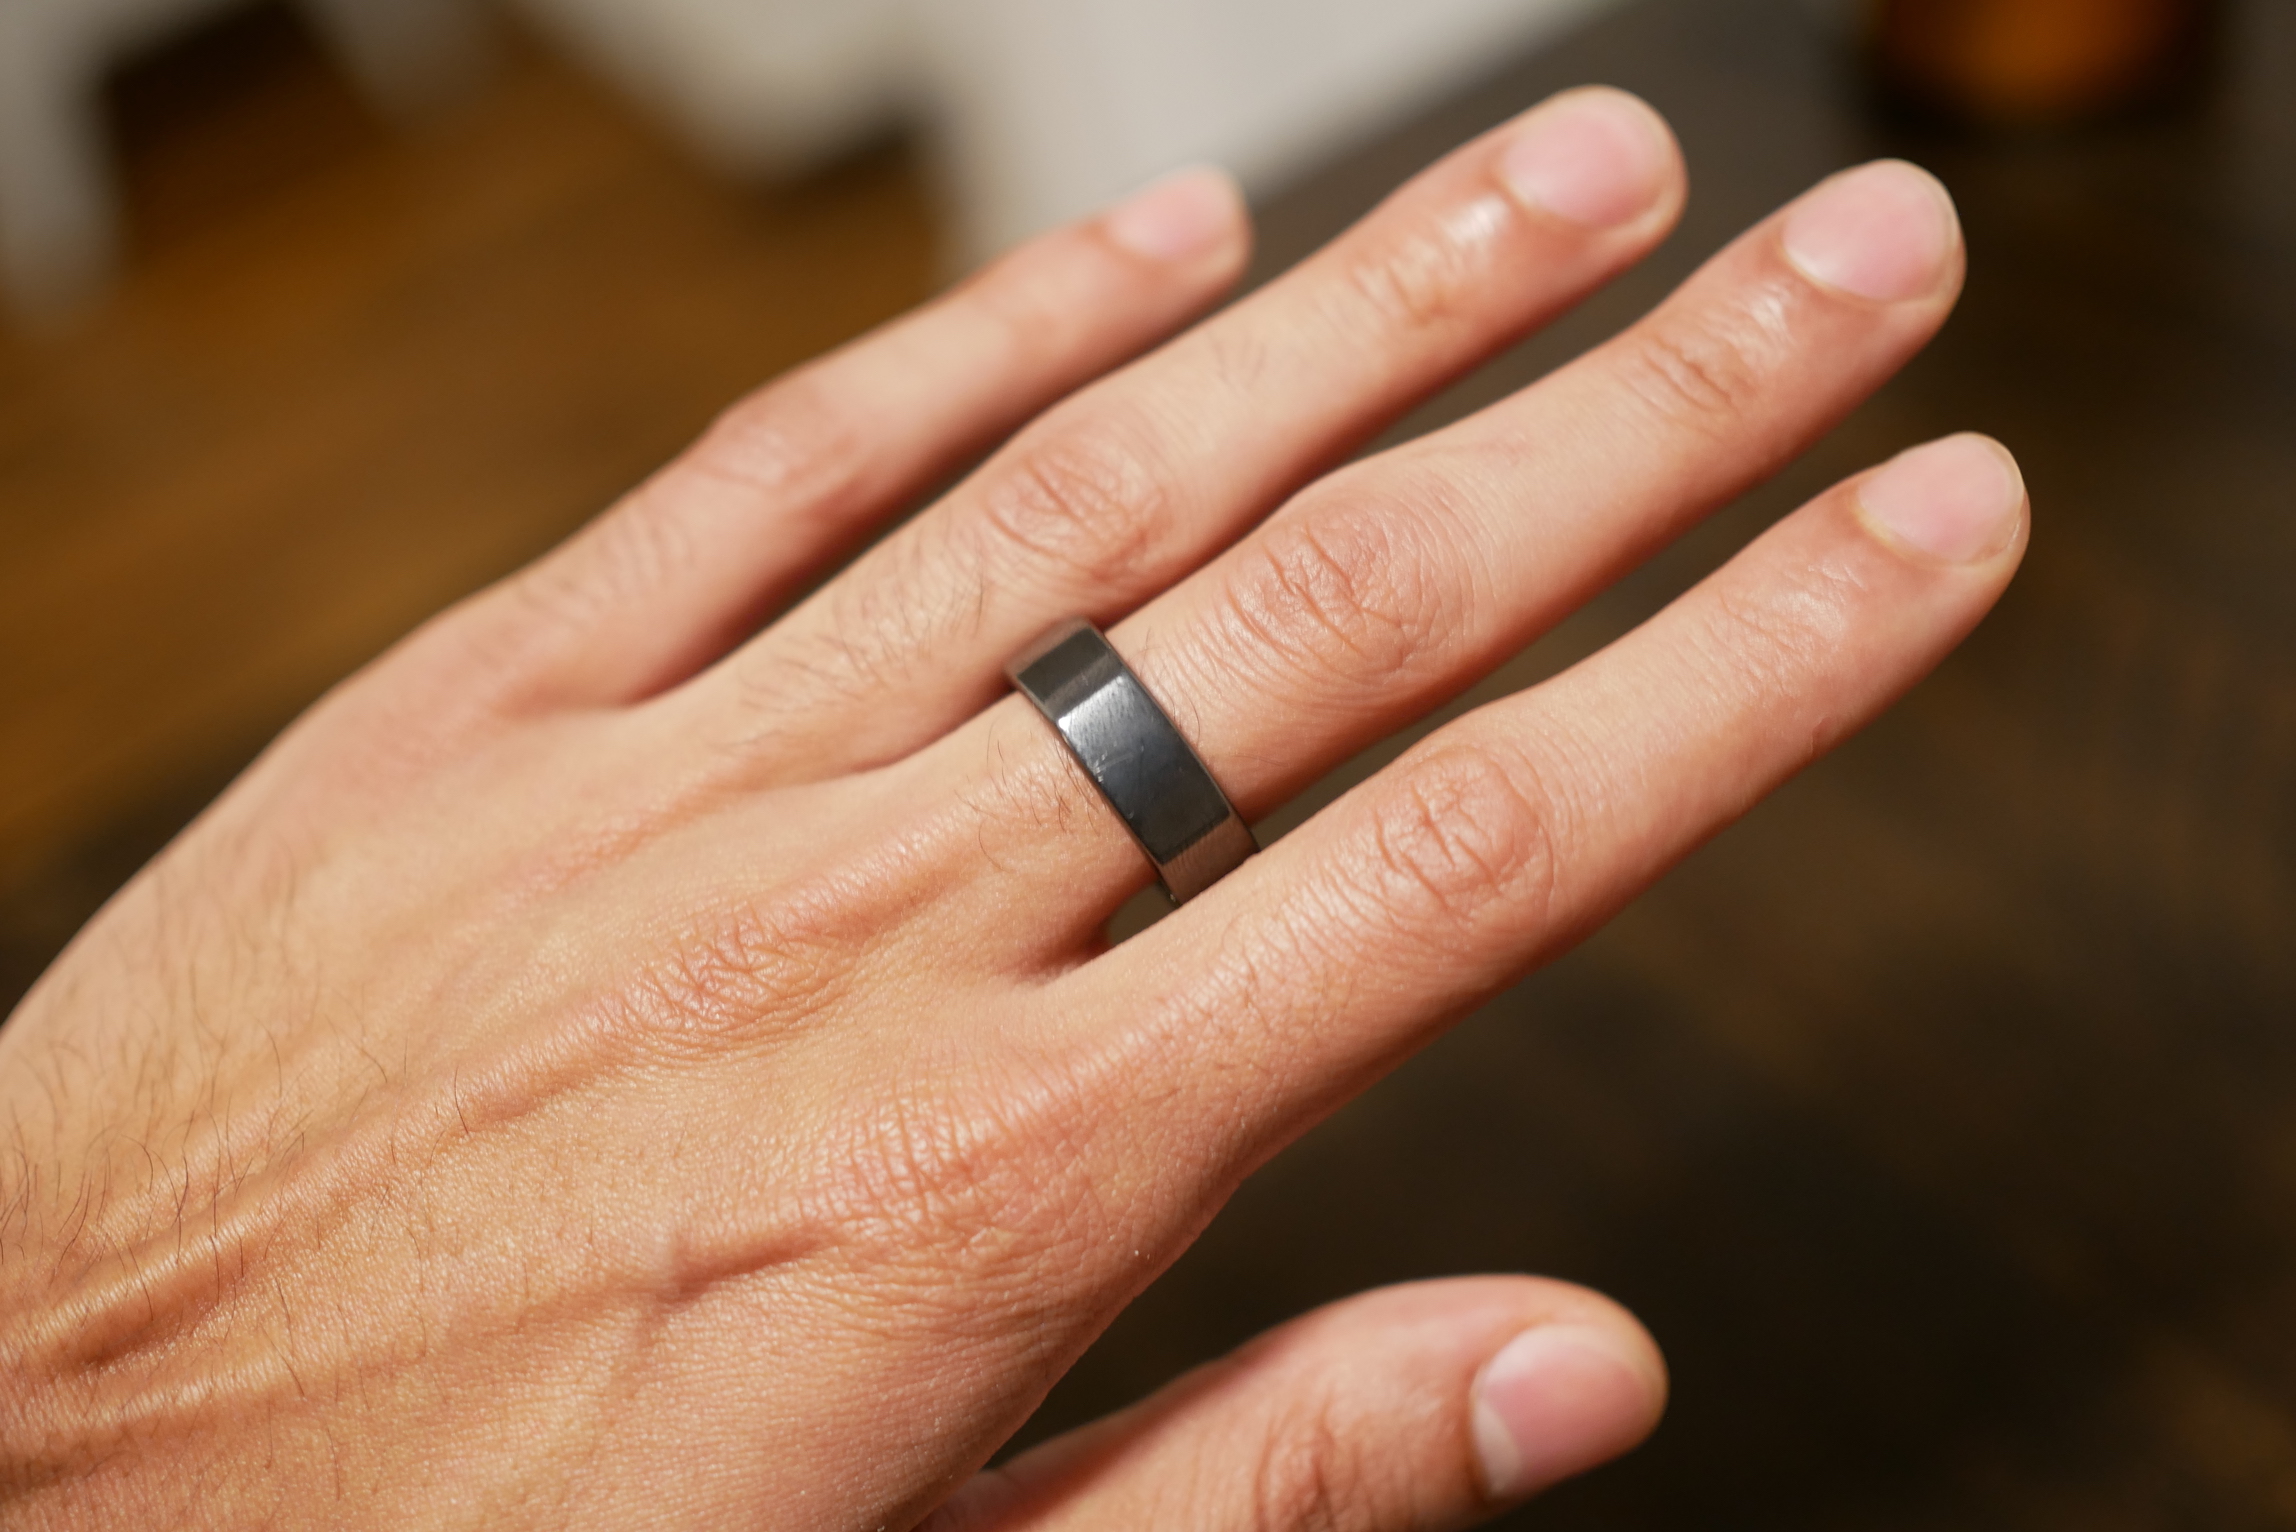 Review: Oura Ring 3 and Whoop 4.0 are 2 ambitious wearables, but they're  tough sells